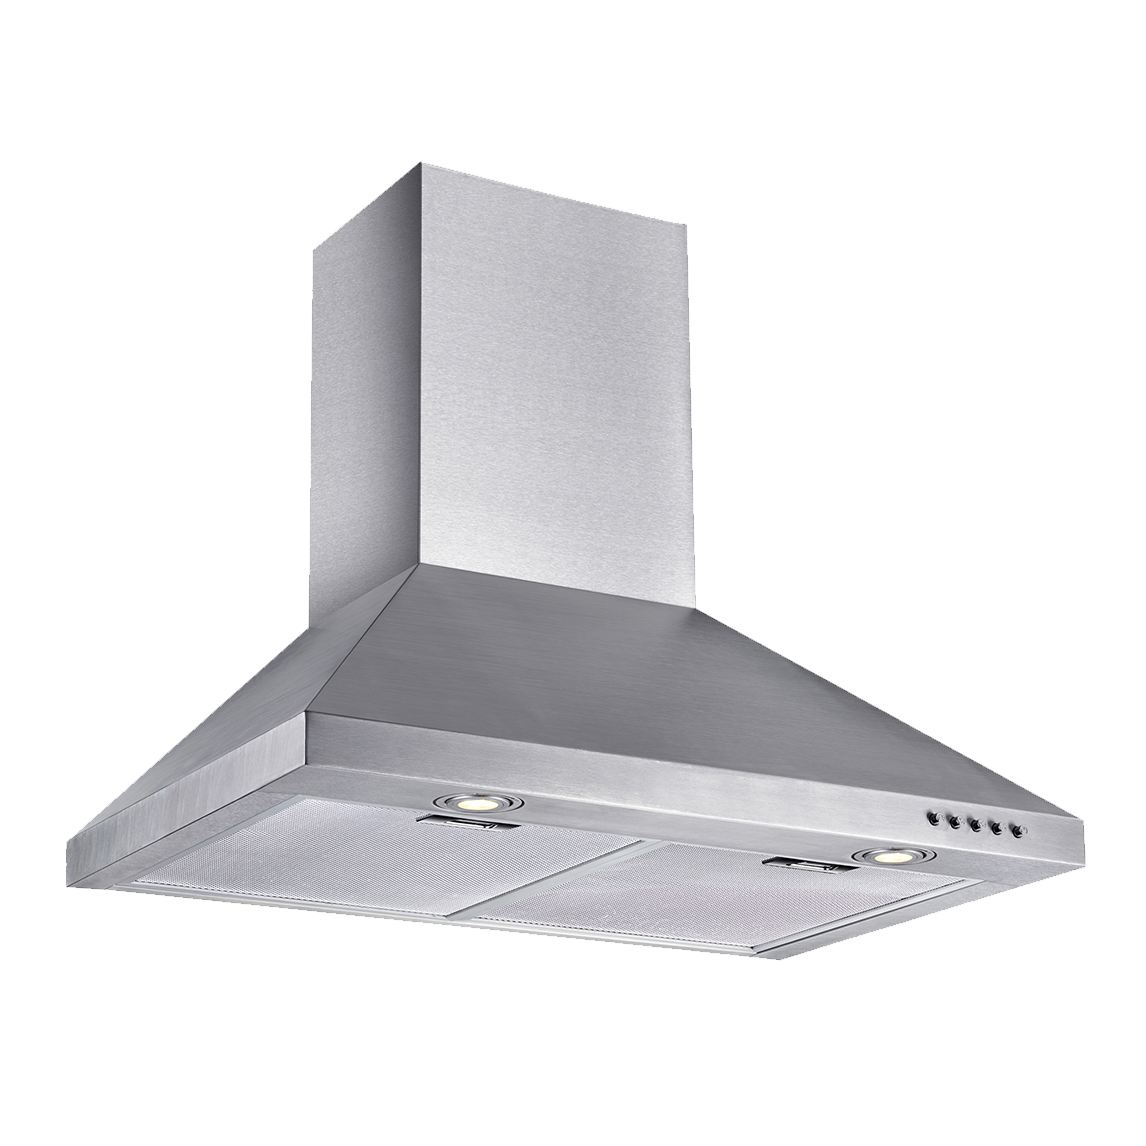 Premium 30'' in Range Hood. Stainless Steel. 3-Speed with Timer.